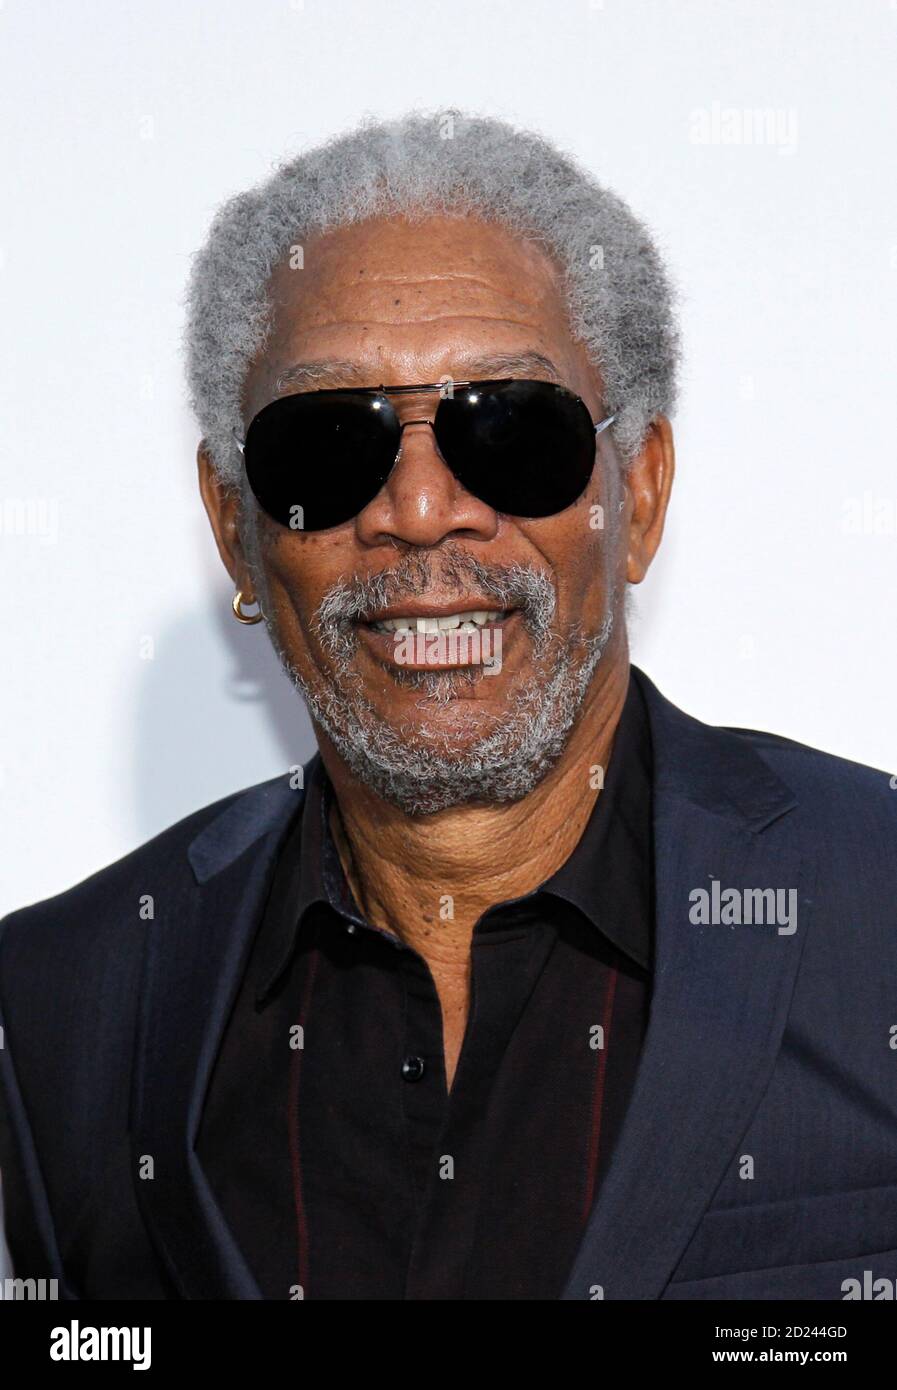 Morgan Freeman arrives at the 21st annual Producers Guild of America Awards in Los Angeles January 24, 2010. REUTERS/Danny Moloshok (UNITED STATES - Tags: ENTERTAINMENT HEADSHOT) Stock Photo